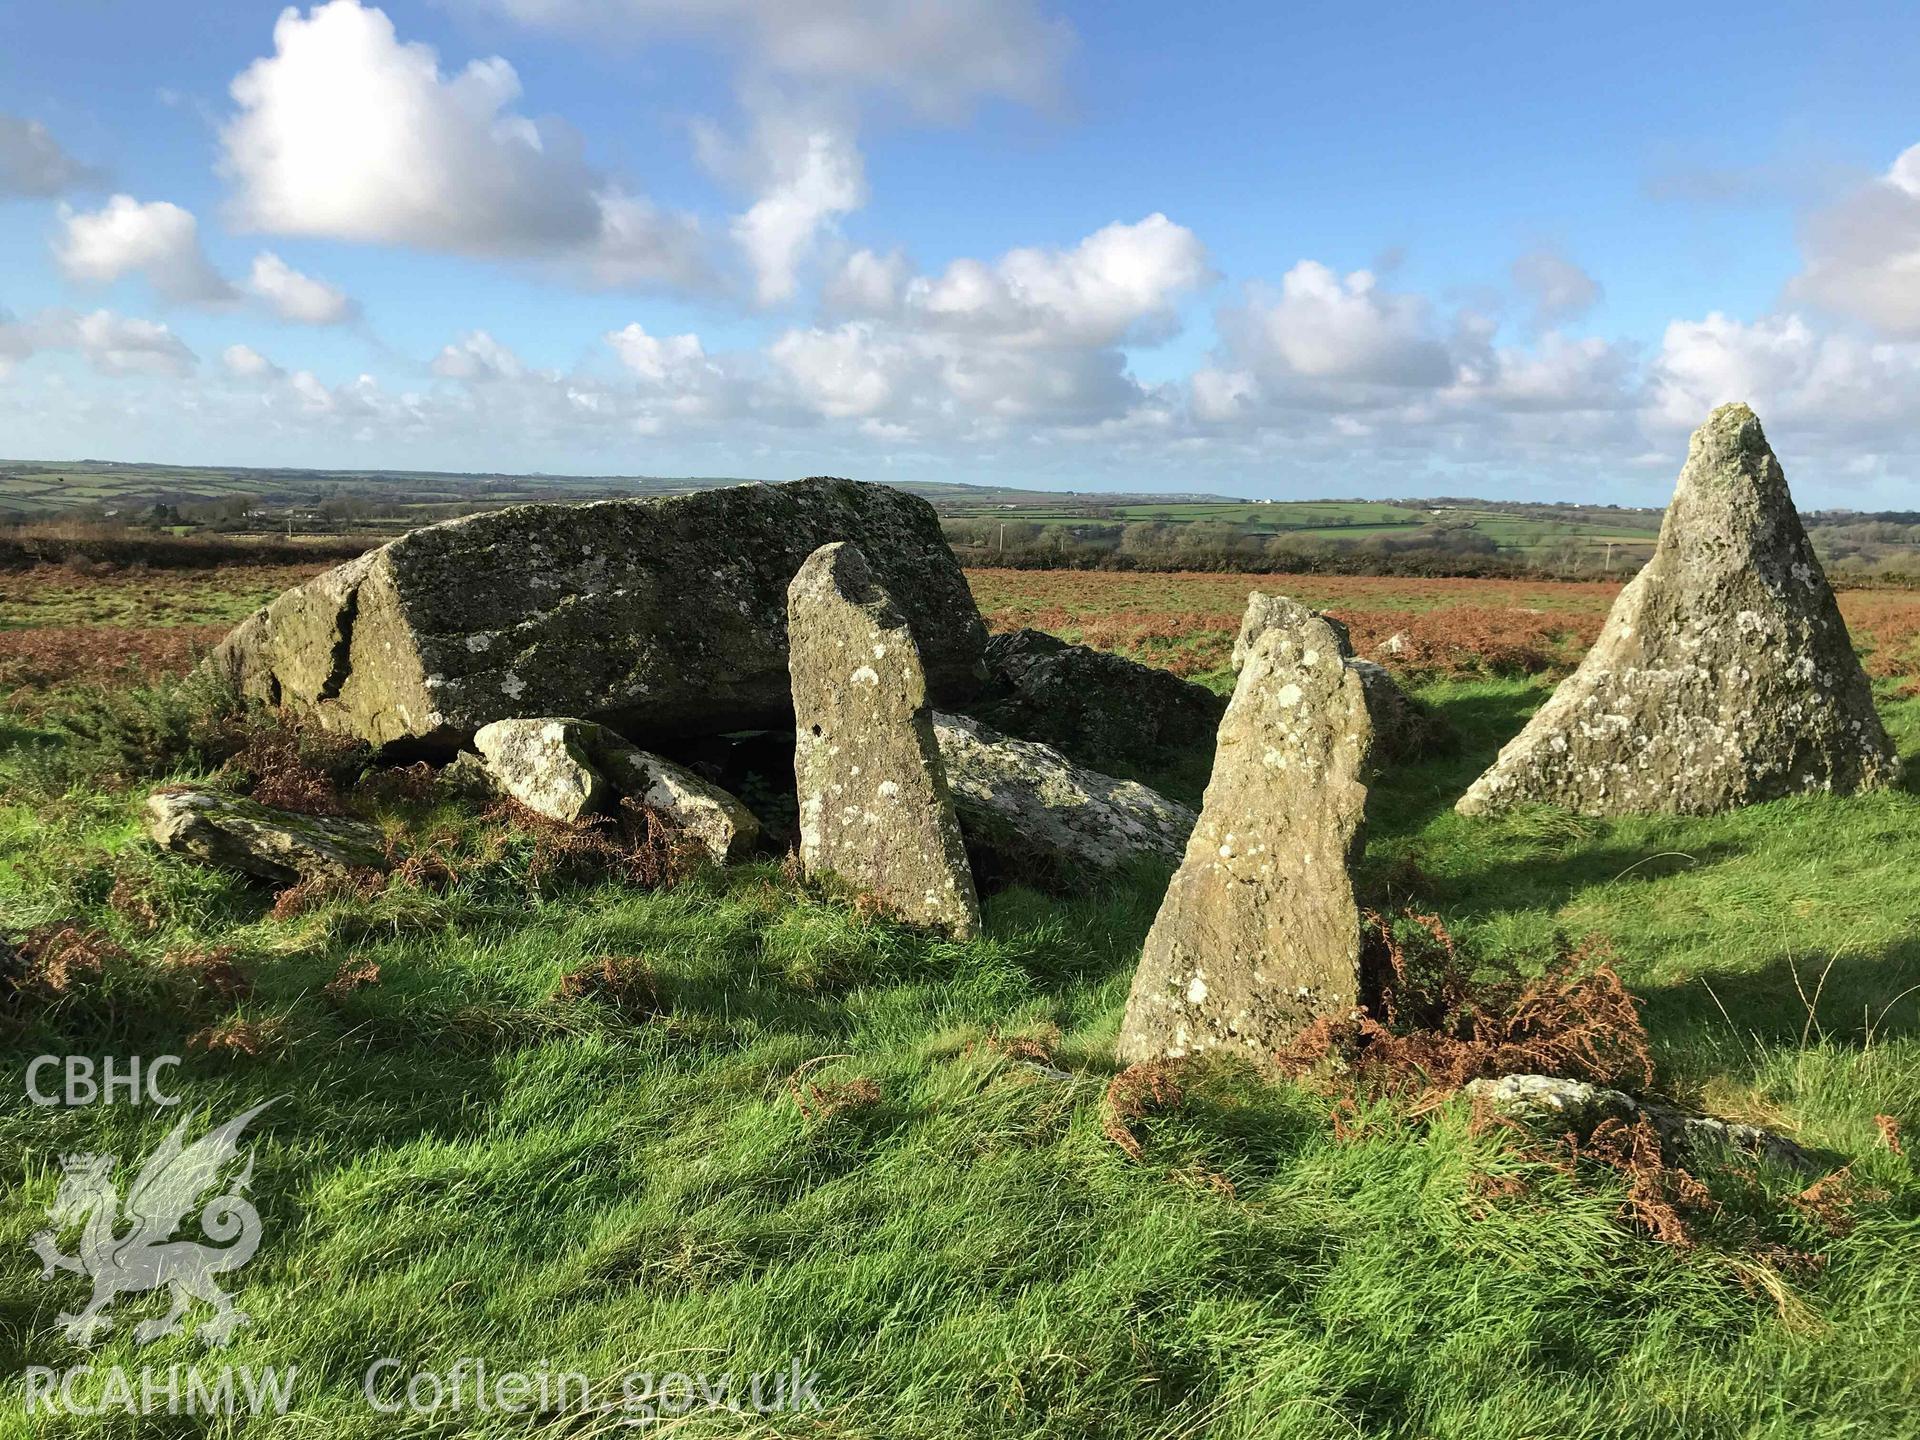 Digital photograph of Carn Turne chambered tomb, produced by Paul Davis in 2020